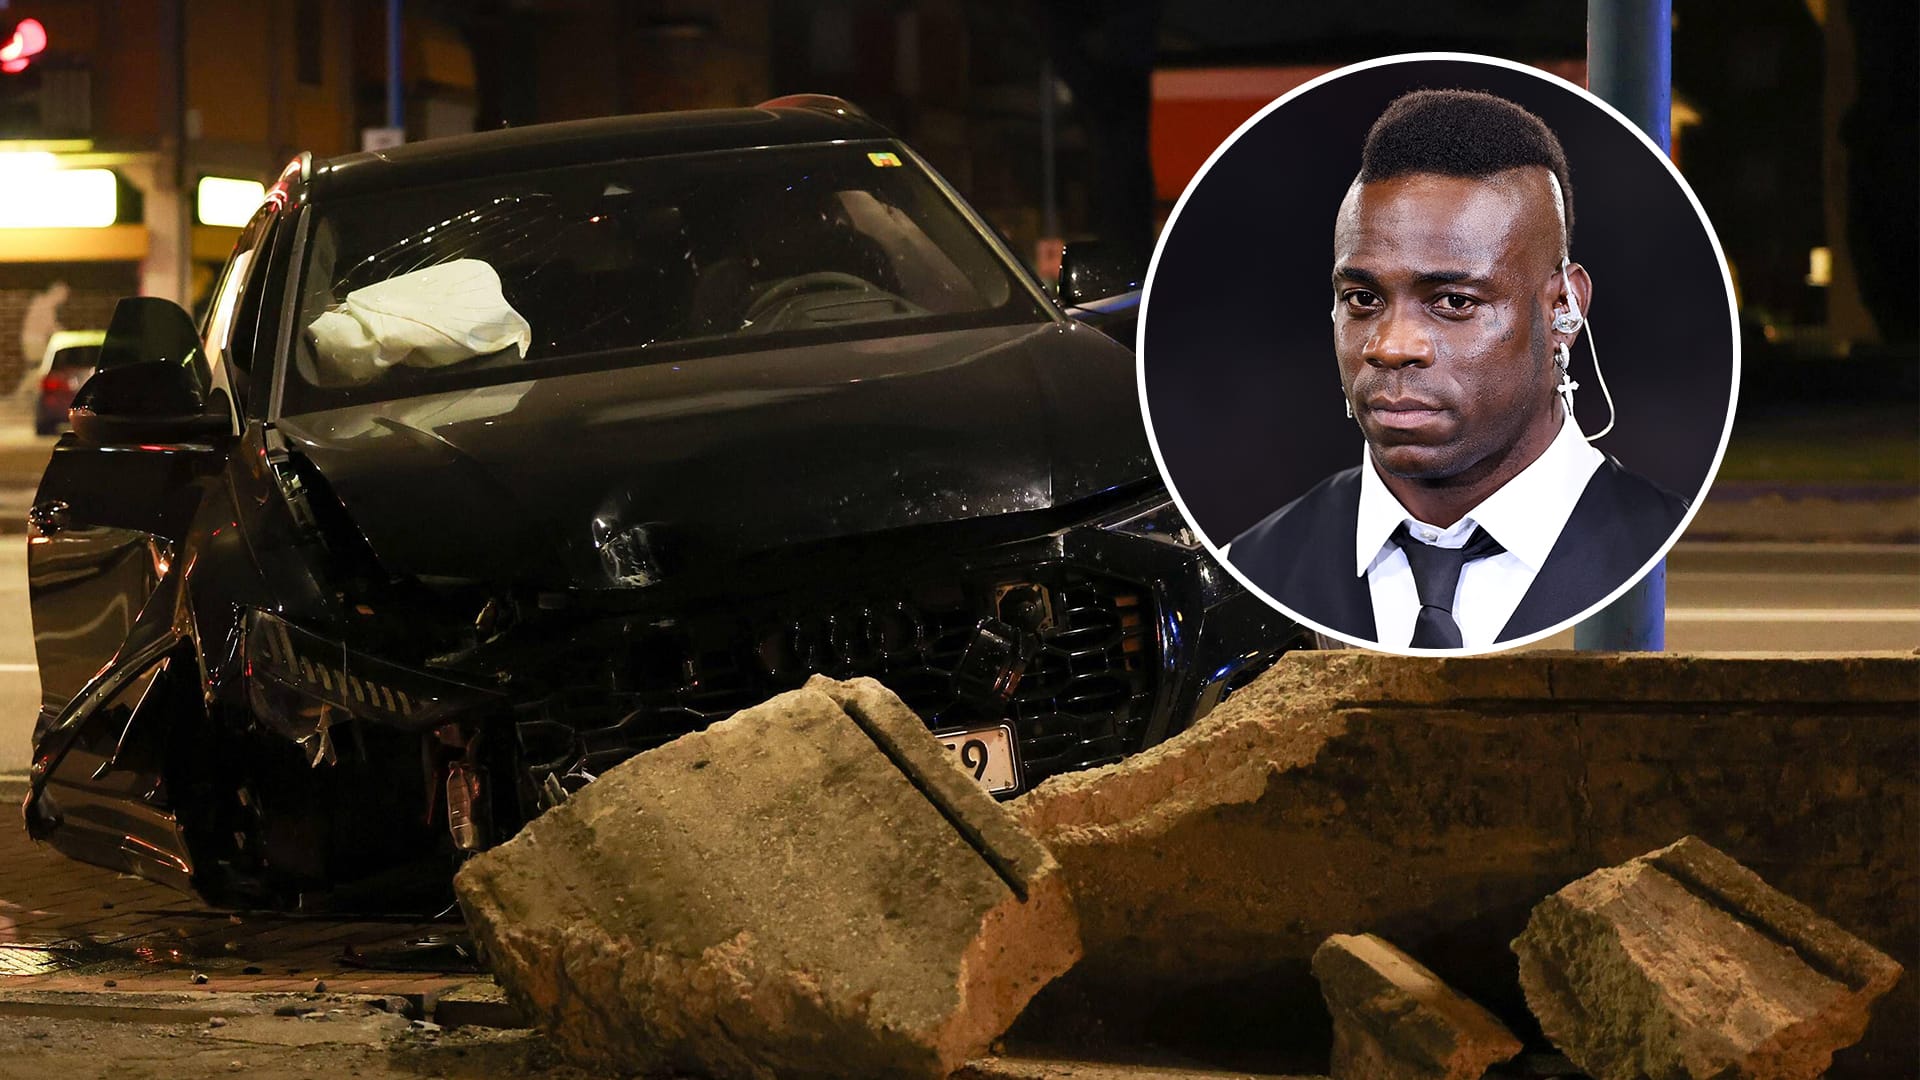 Mario Balotelli smashes £100k Audi into wall in horror accident before 'refusing breathalyser test'